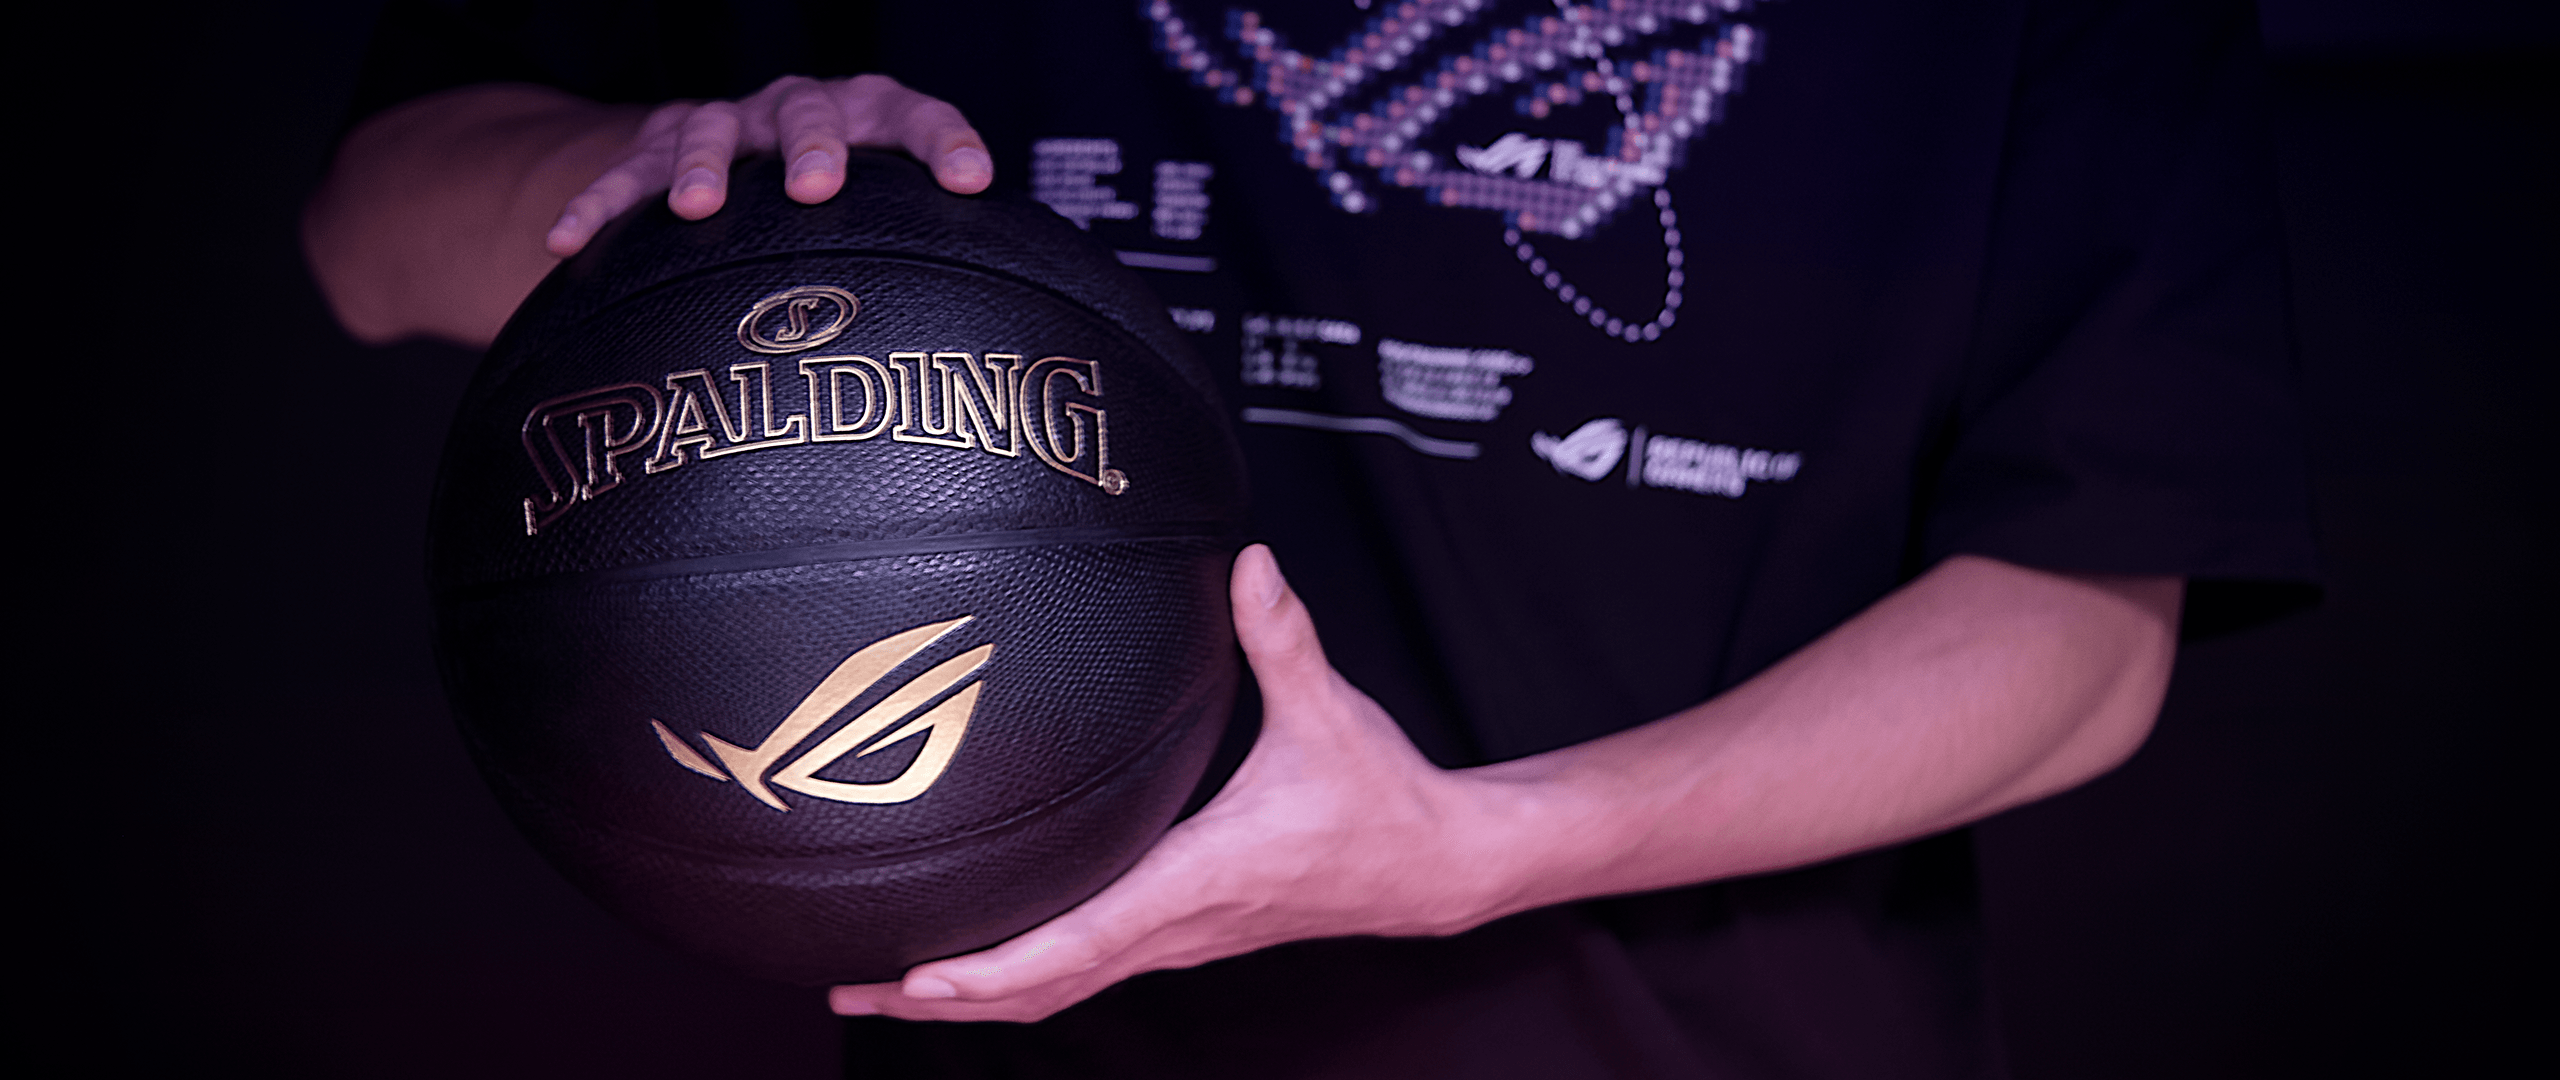 Carrying the ROG x Spalding Basketball